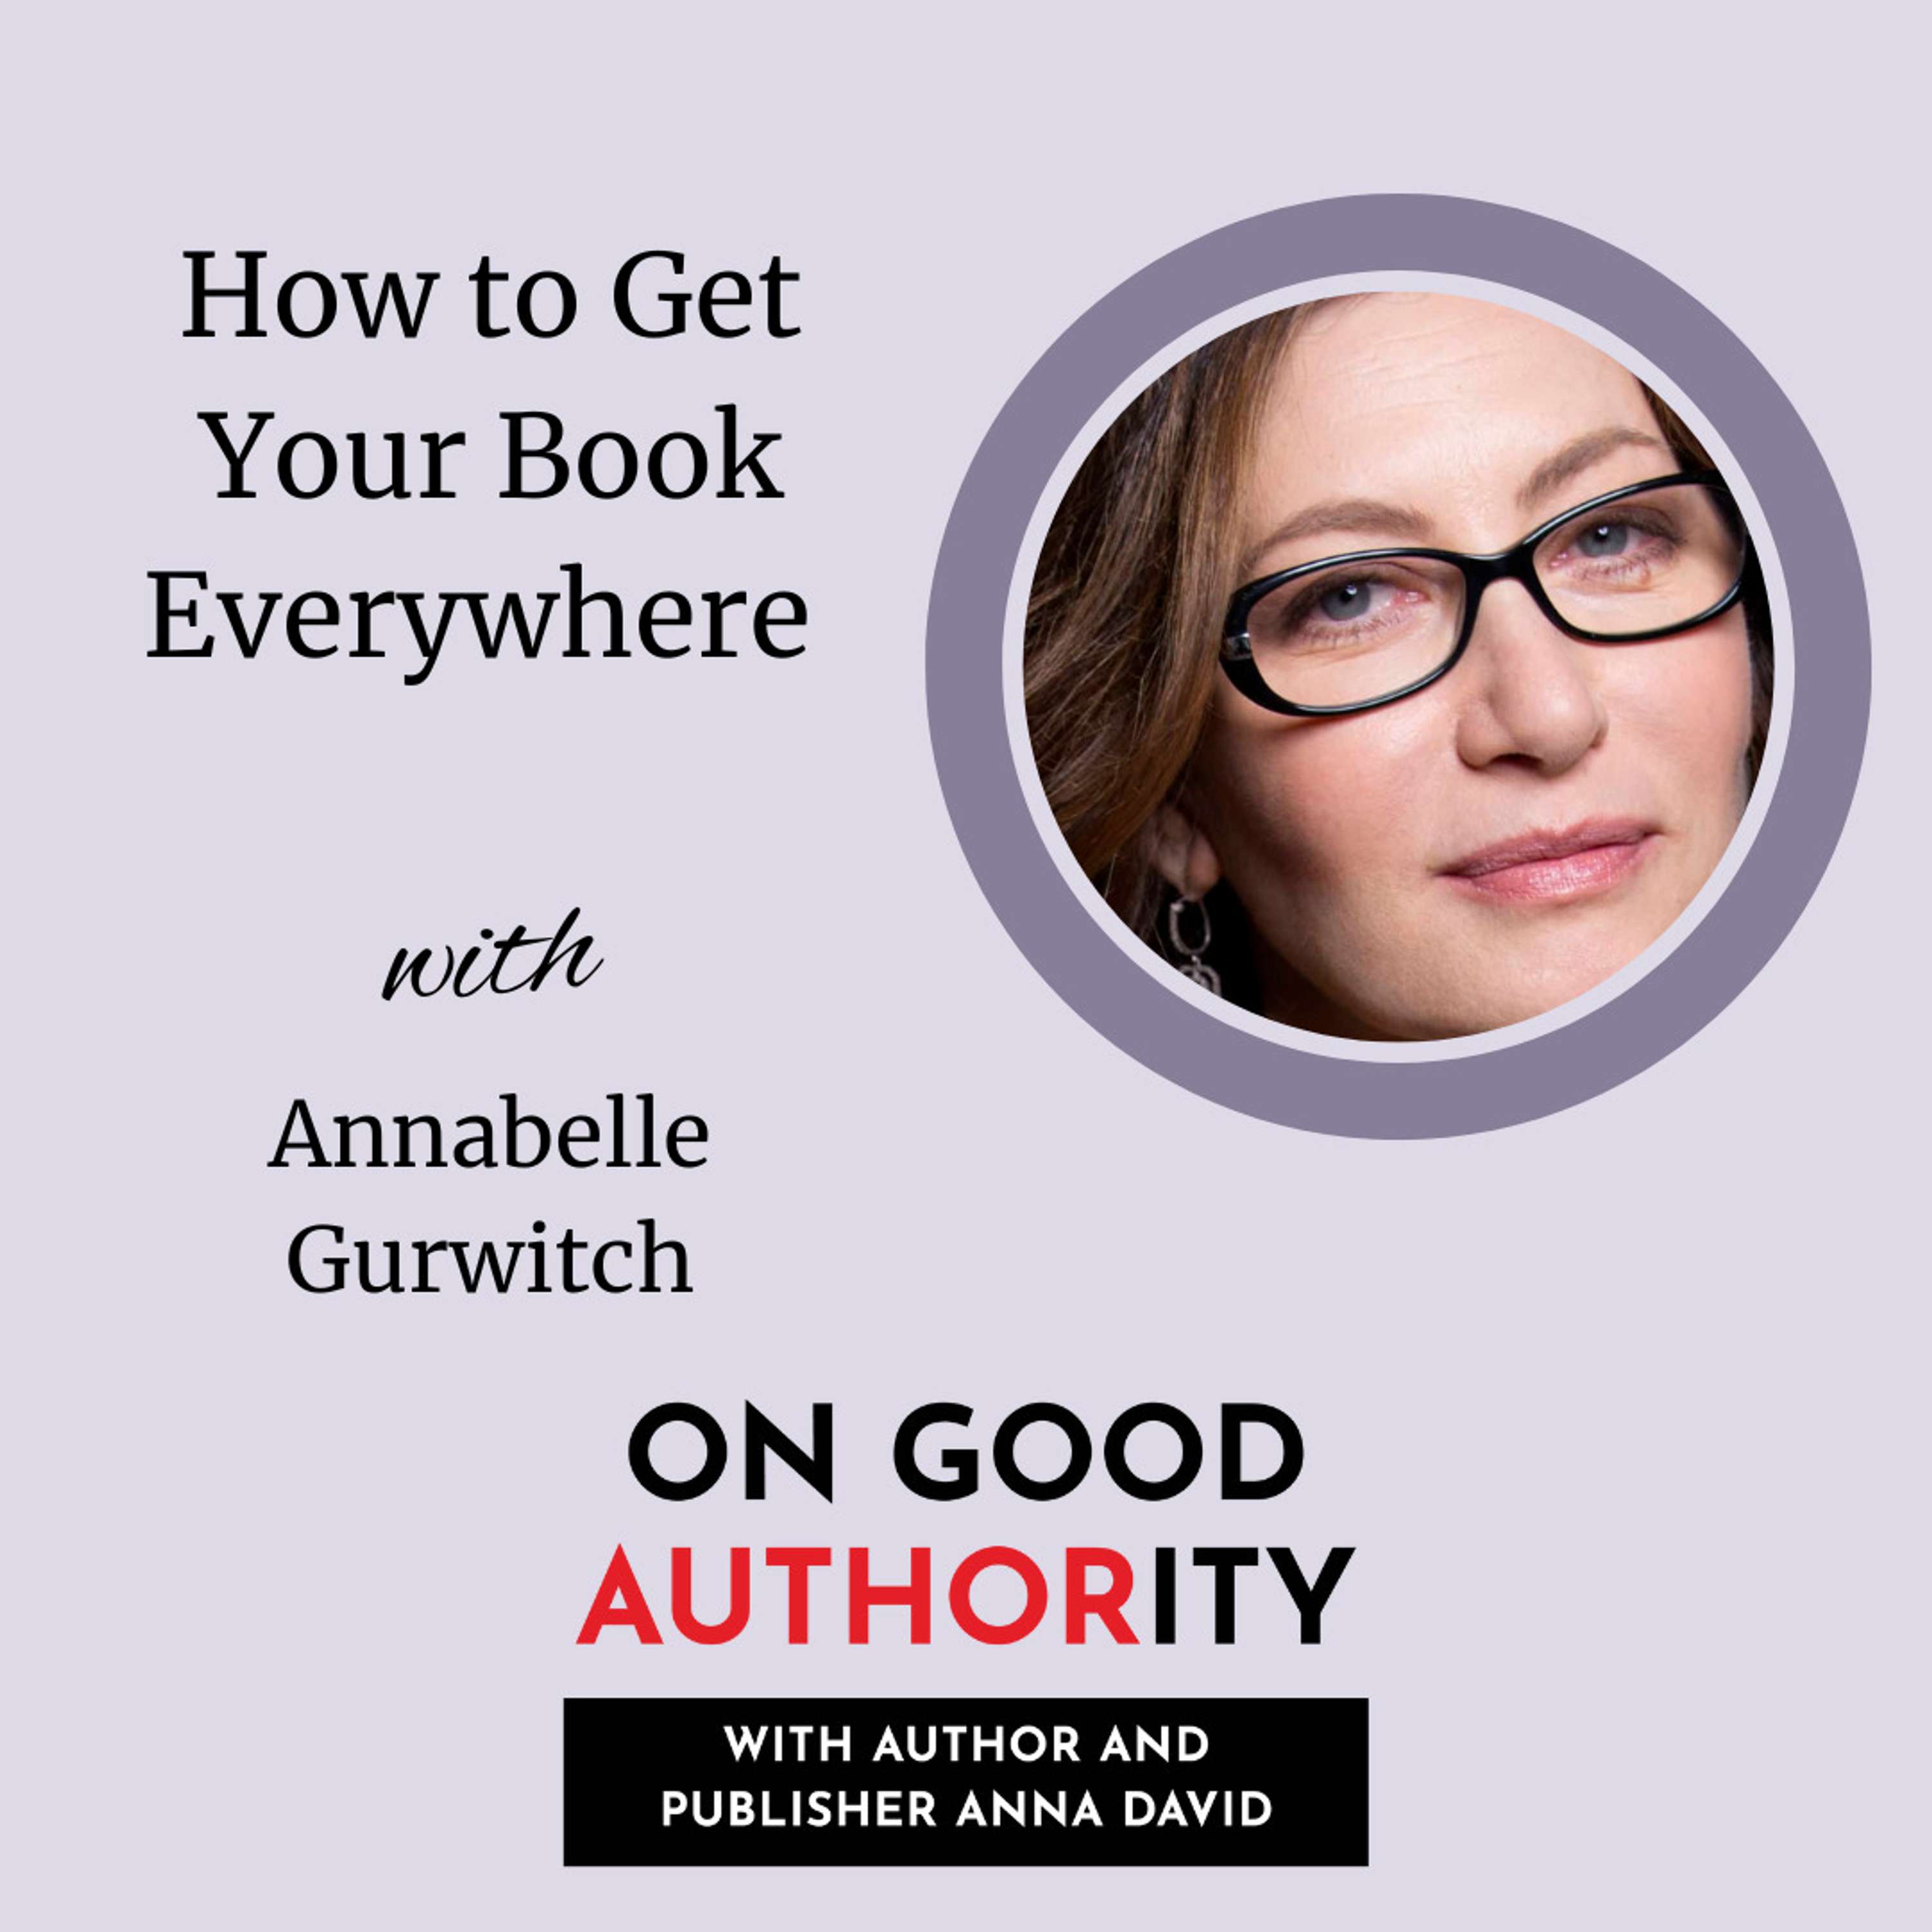 How to Get Your Book Everywhere with Annabelle Gurwitch